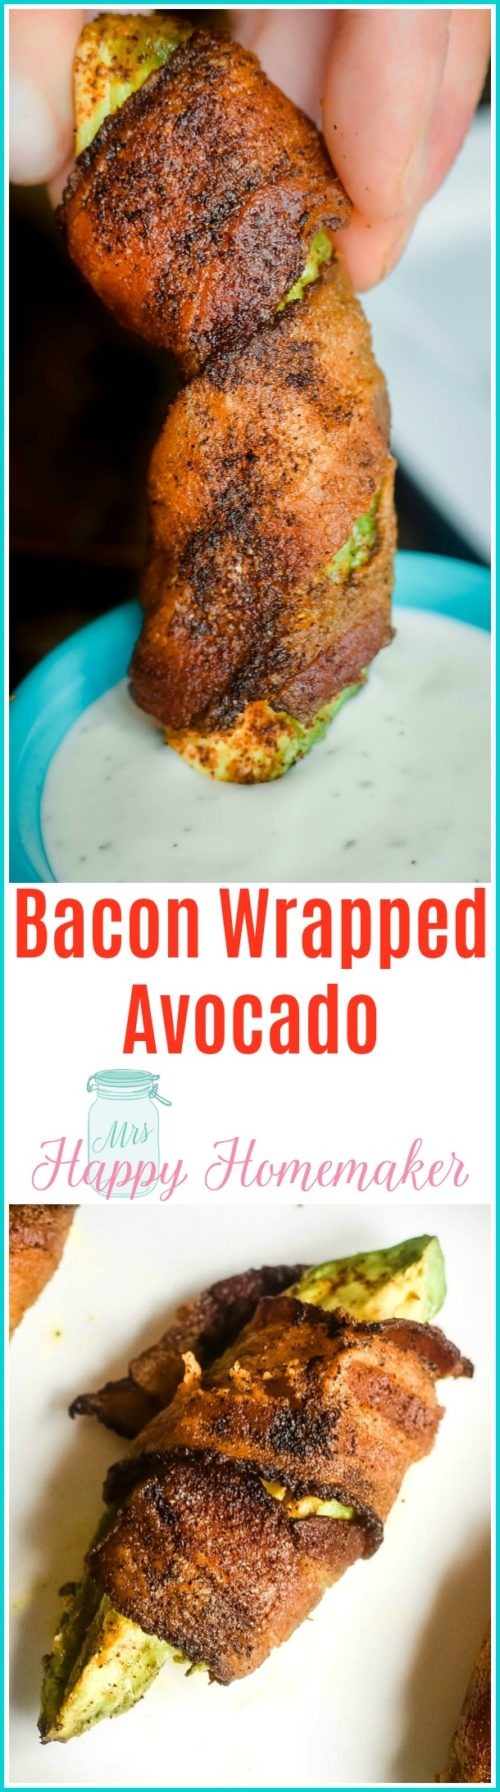 Bacon Wrapped Avocado | Low Carb and Whole30/Paleo friendly too! | MrsHappyHomemaker.com @mrshappyhomemaker #avocado #baconwrappedavocado #whole30 #paleo #lowcarb